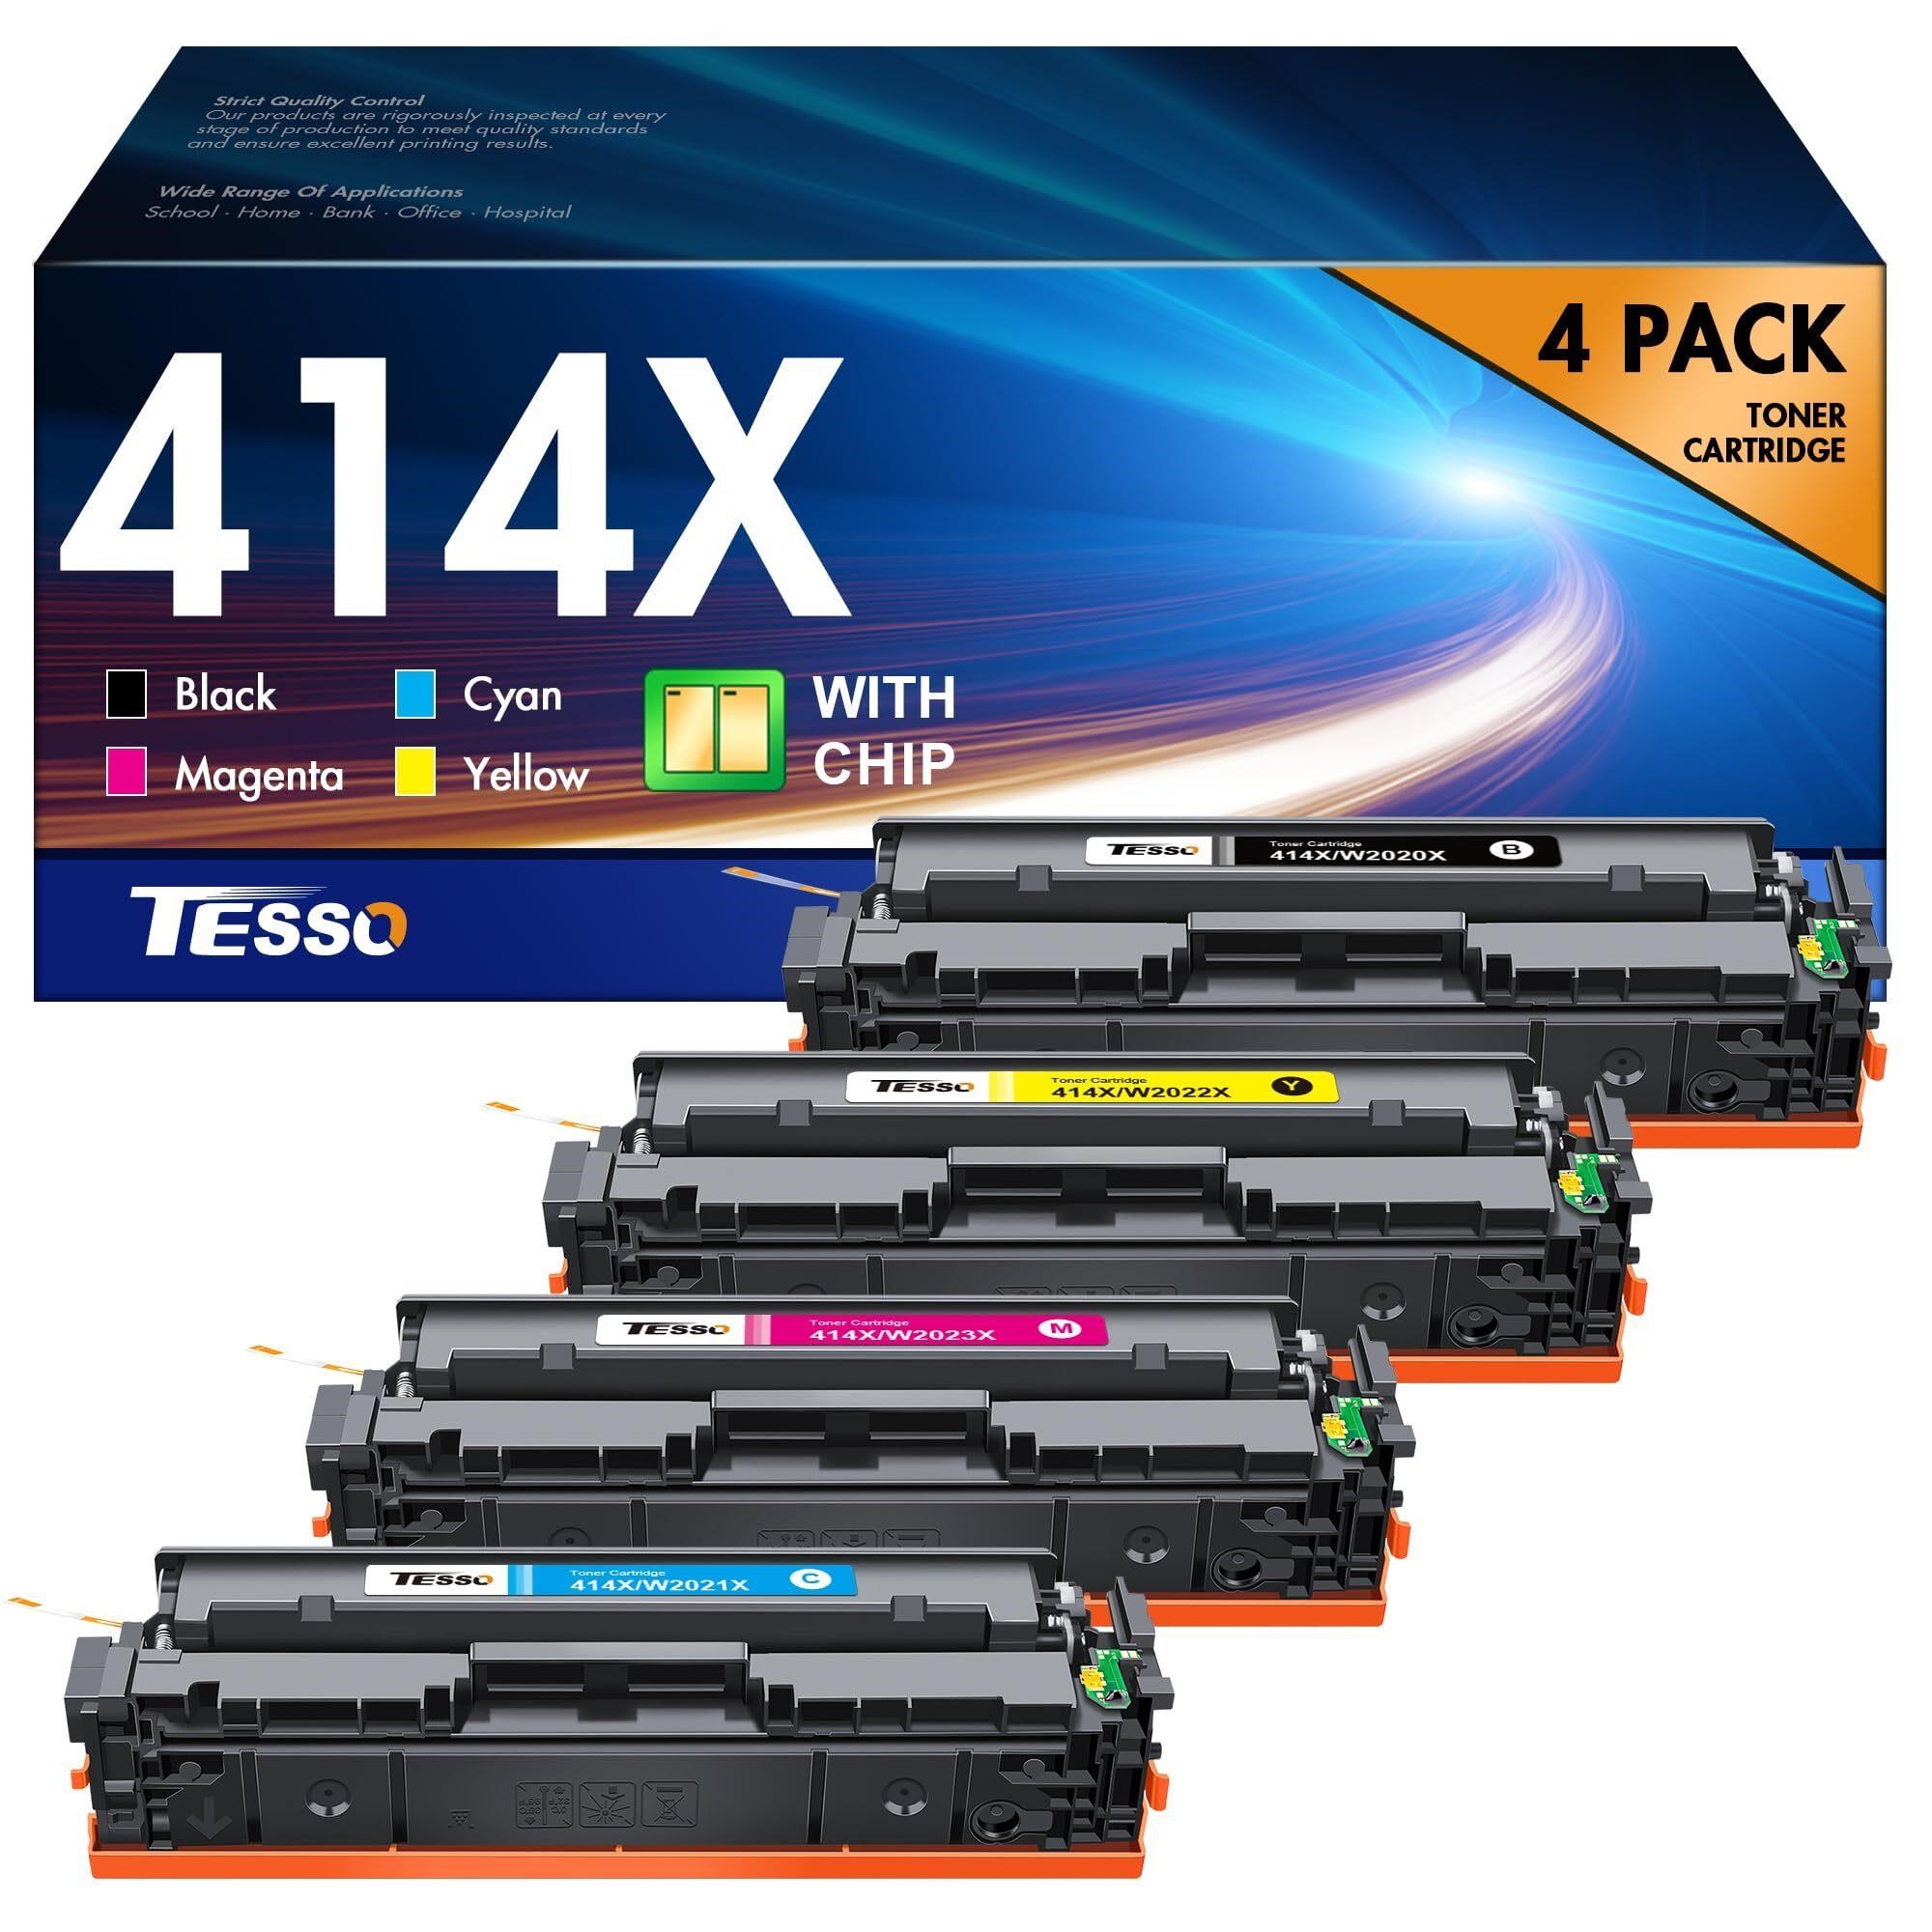 414X Toner Cartridges 4 Pack High Yield with Chip